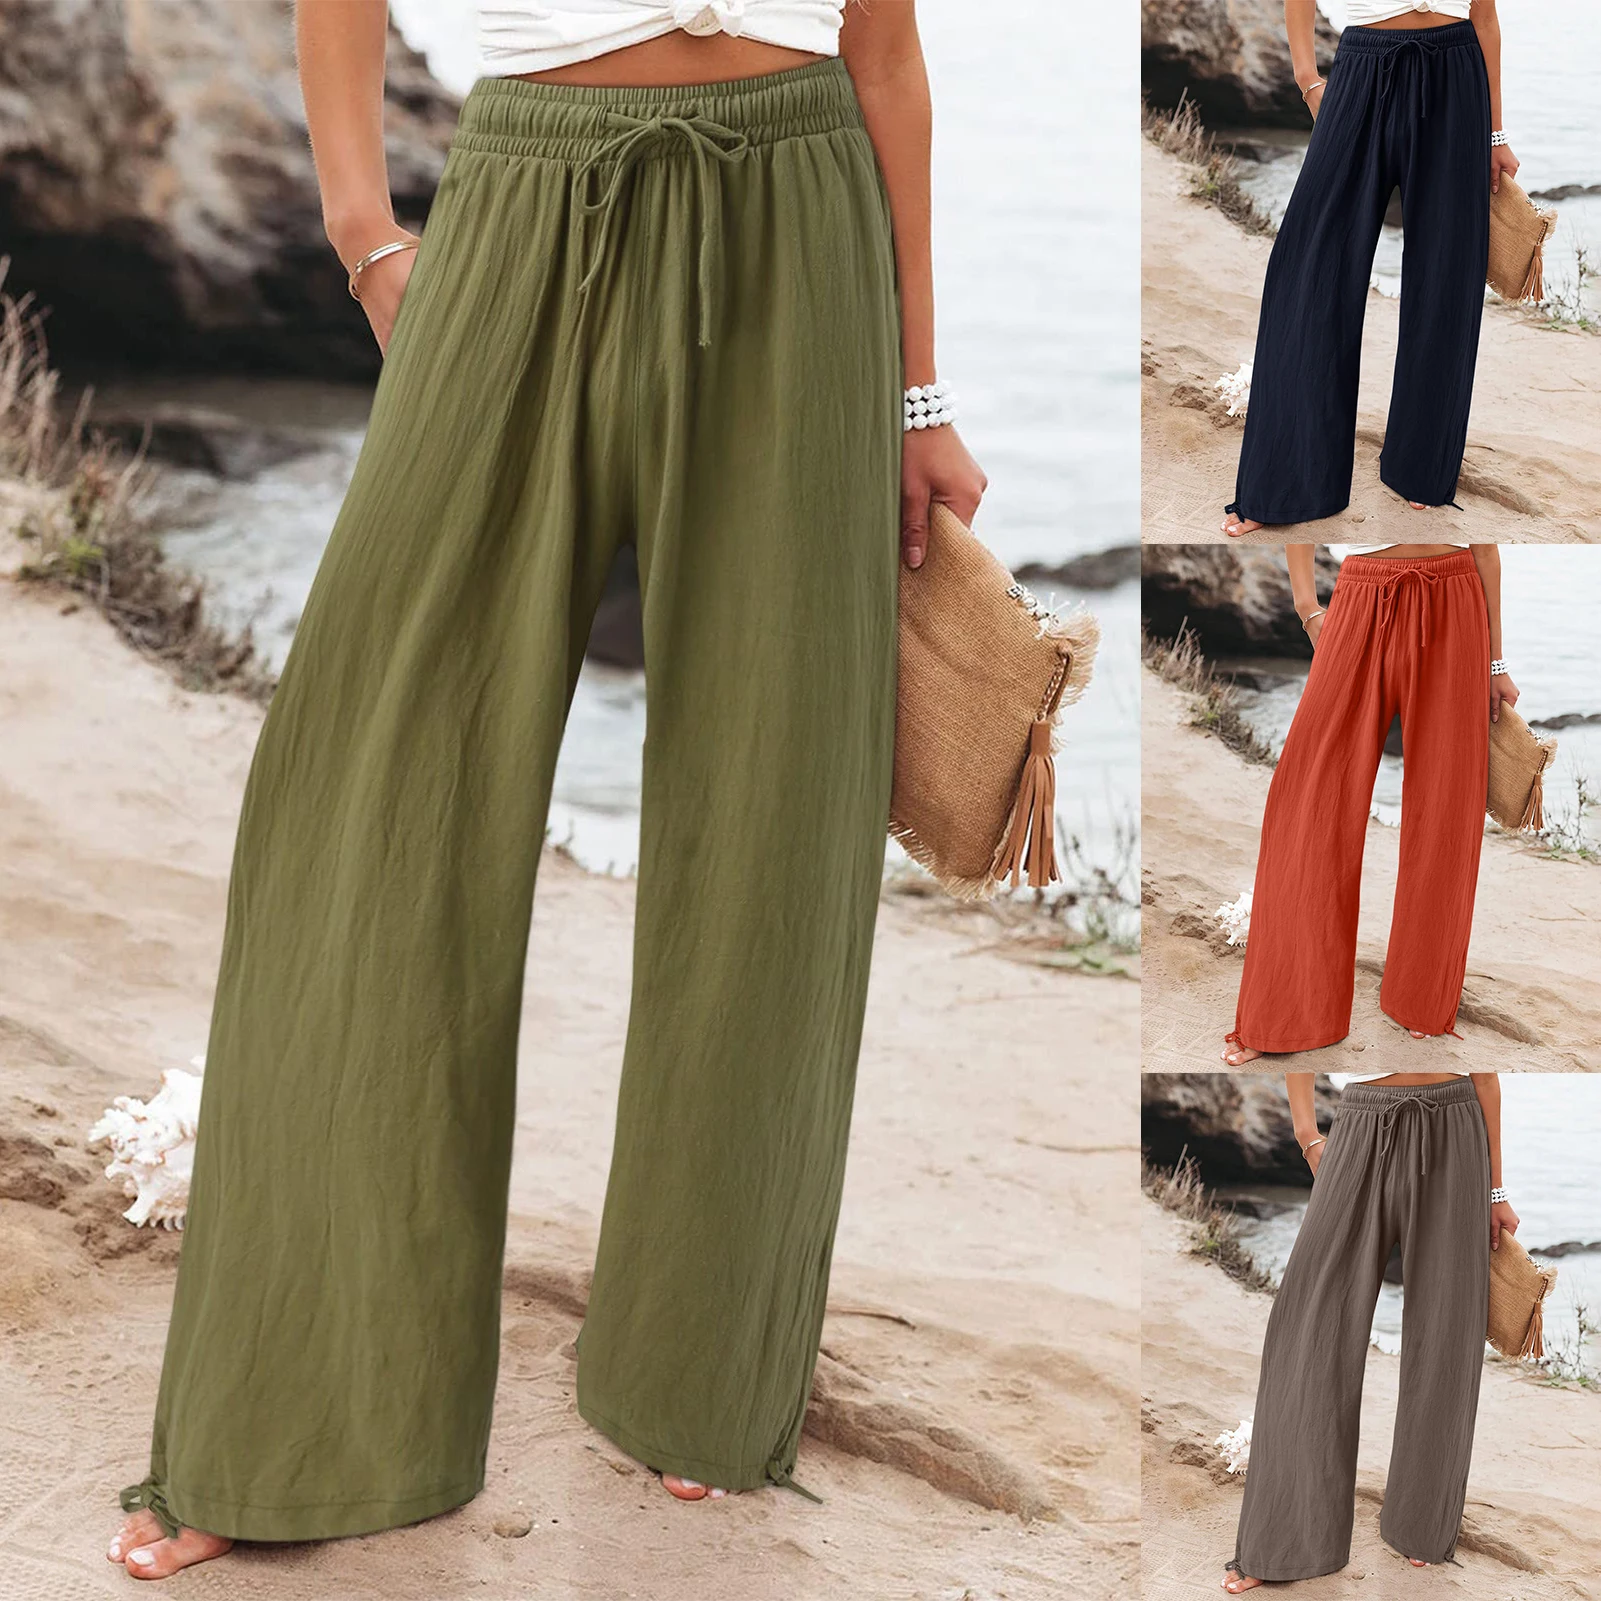 Summer Beach Pants Women Cotton Linen Ladies Pants with Pockets High Waisted Solid Color Tie Up Boho Style  Casual Trousers 2023